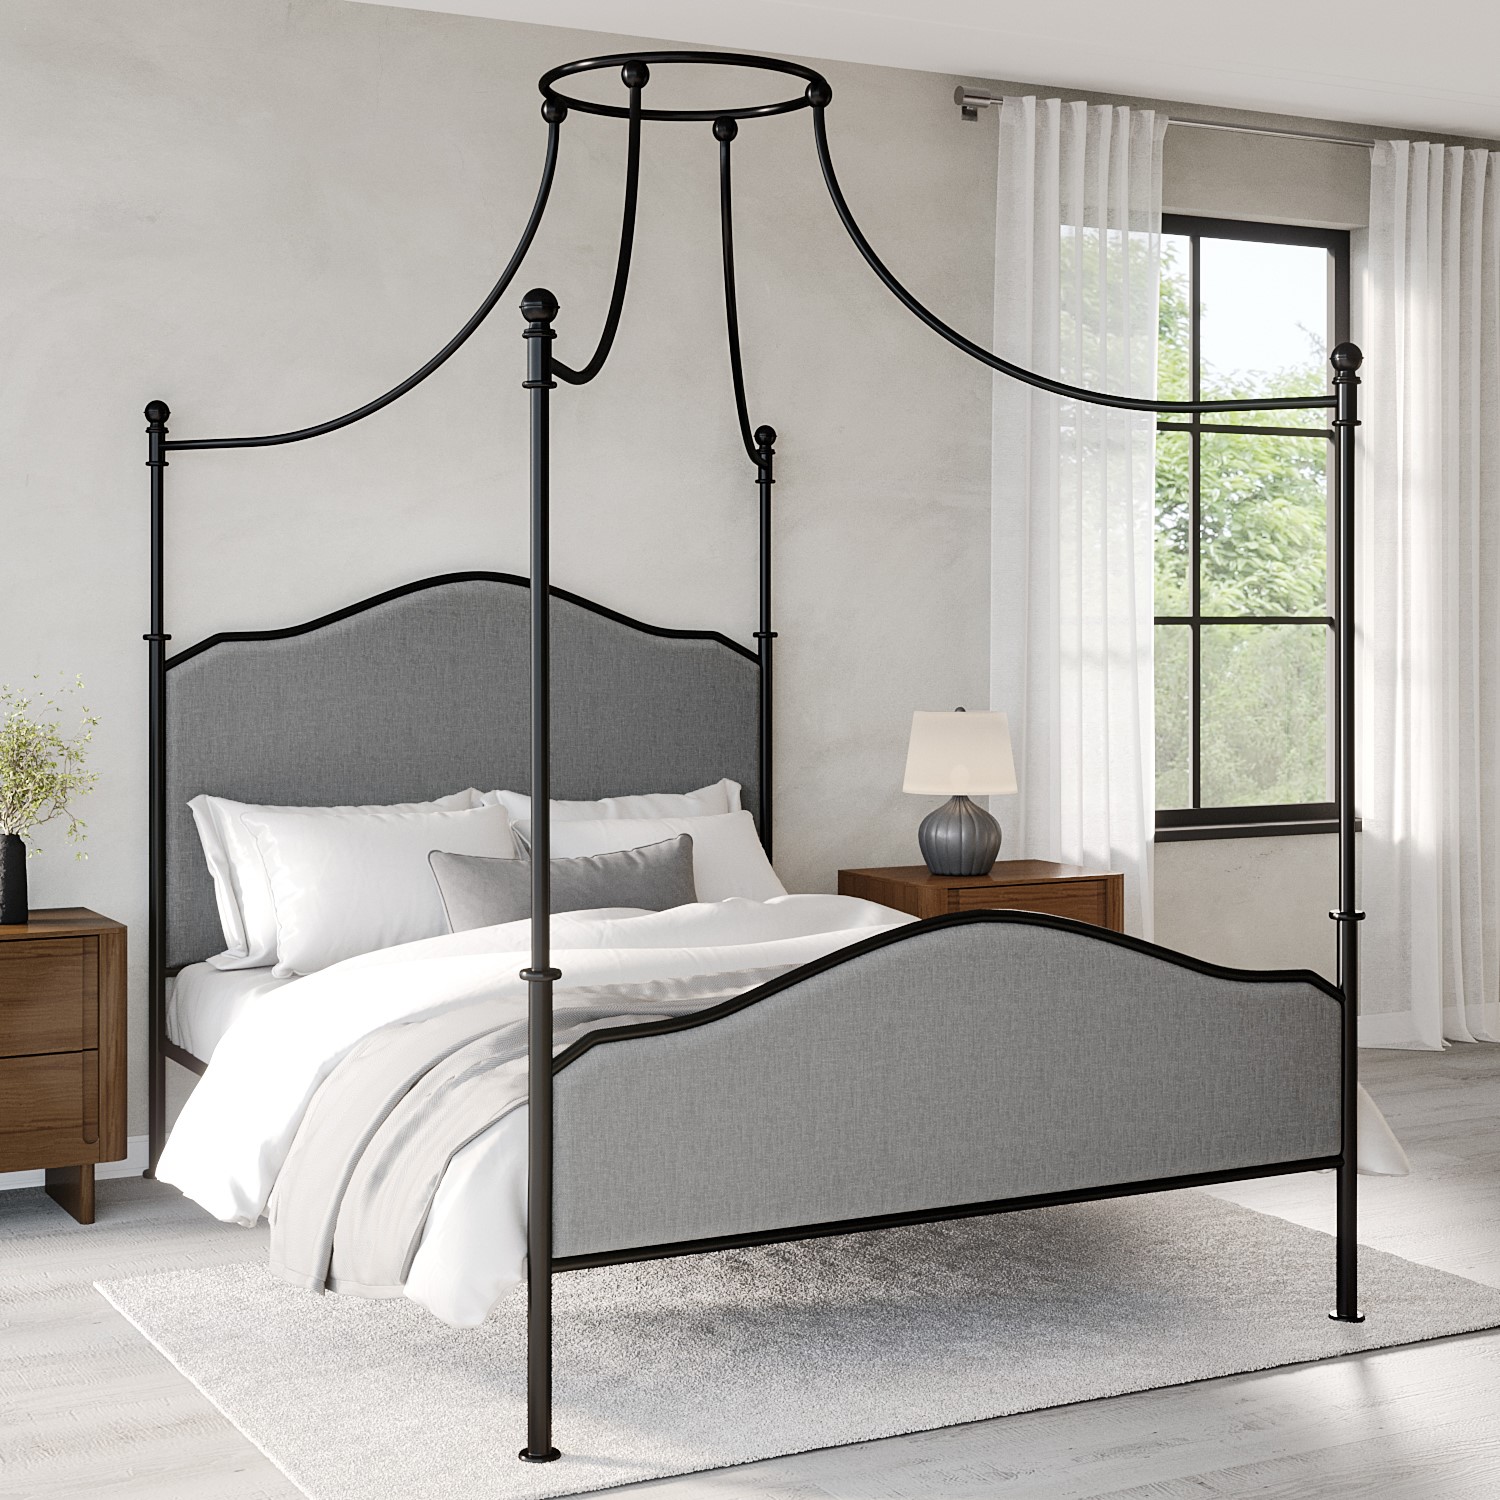 Photo of Double canopy bed frame in black metal - lille